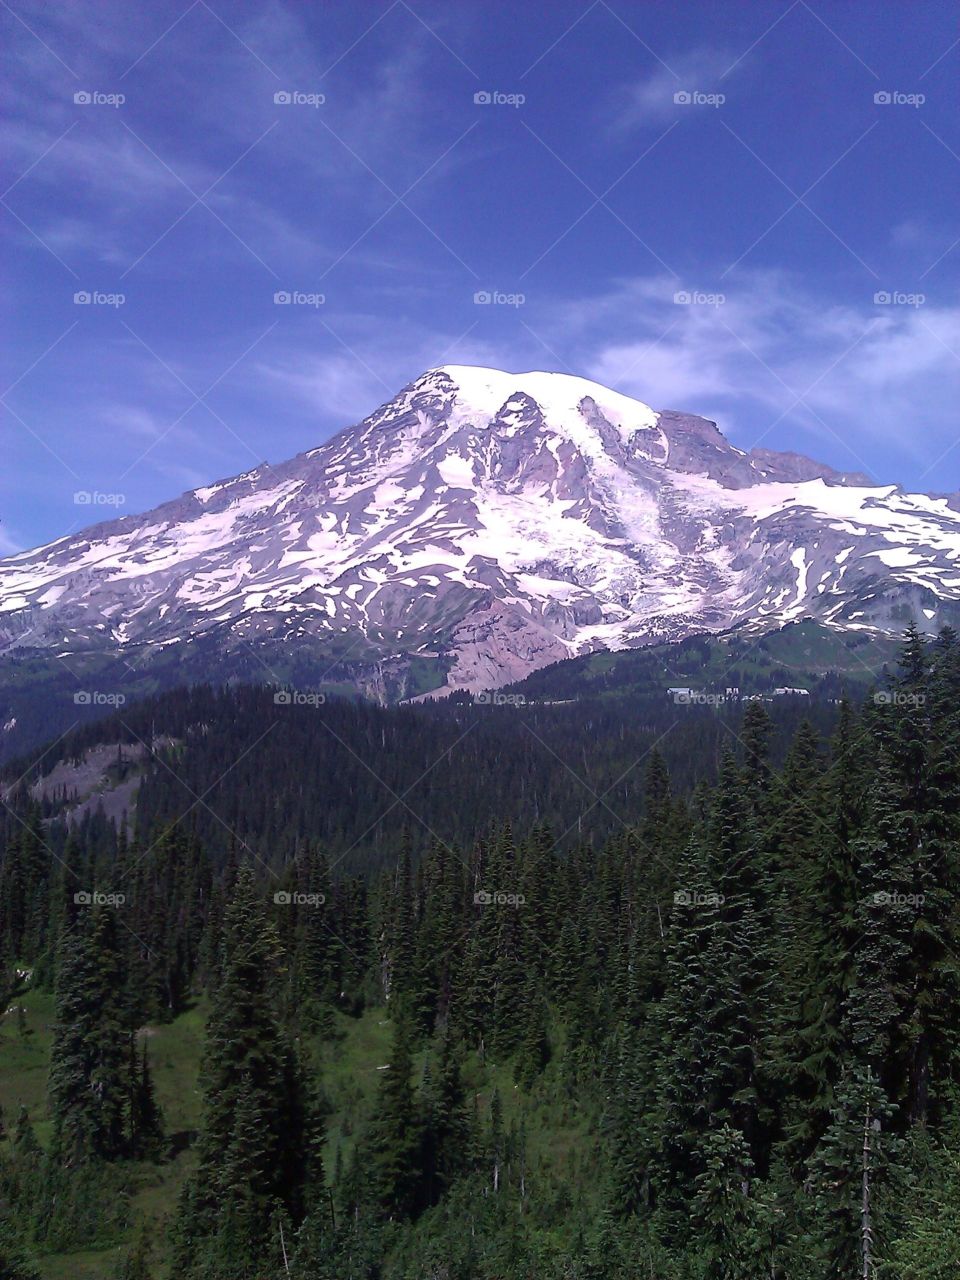 A mountain overlooking a forest in the foreground. Mt. Rainier in Washington state.